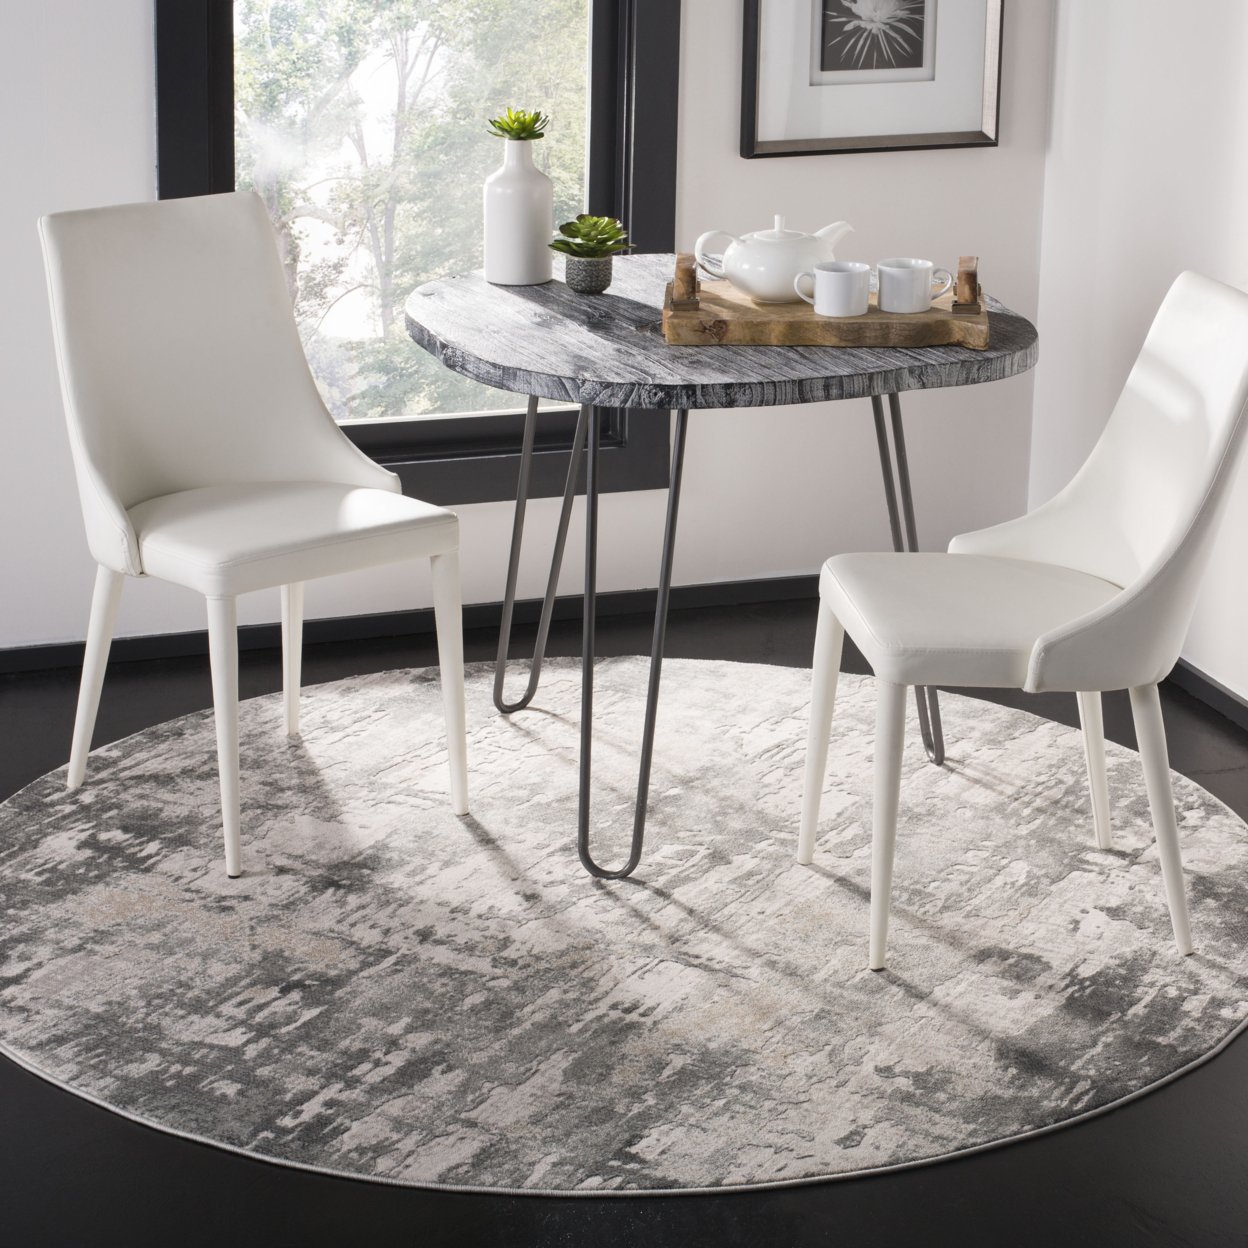 SAFAVIEH Vogue Collection VGE143A Beige / Charcoal Rug - 3' Round